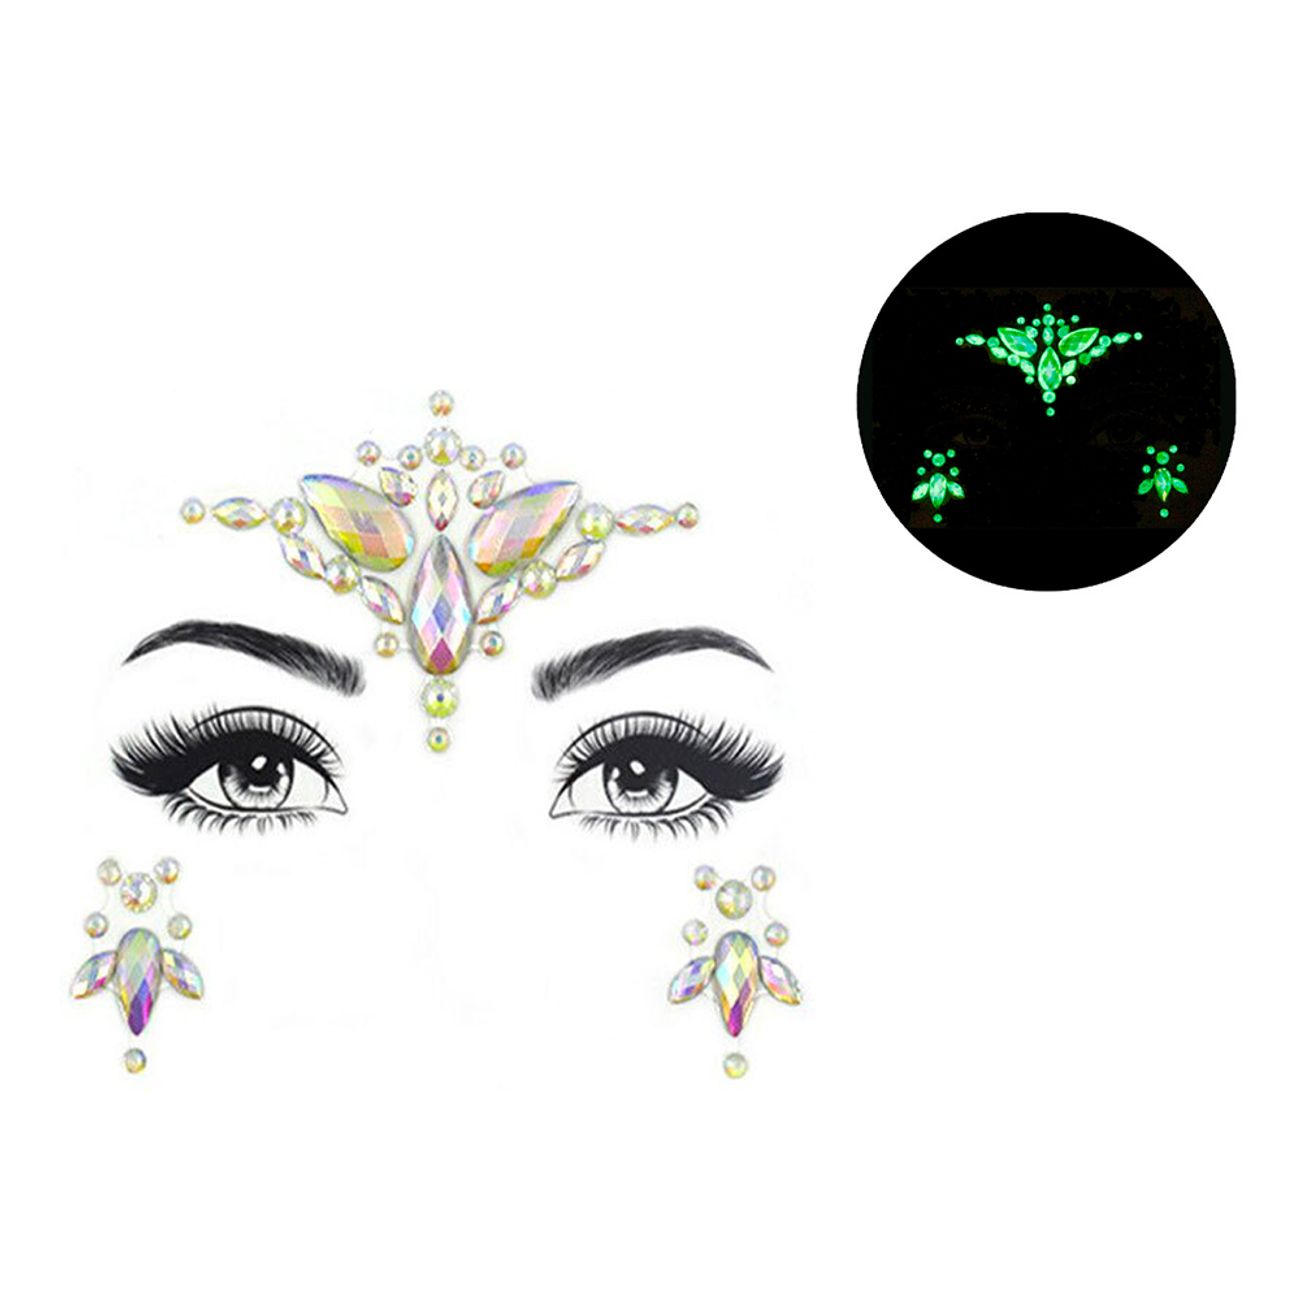 face-jewels-glow-in-the-dark-showtime-83484-1